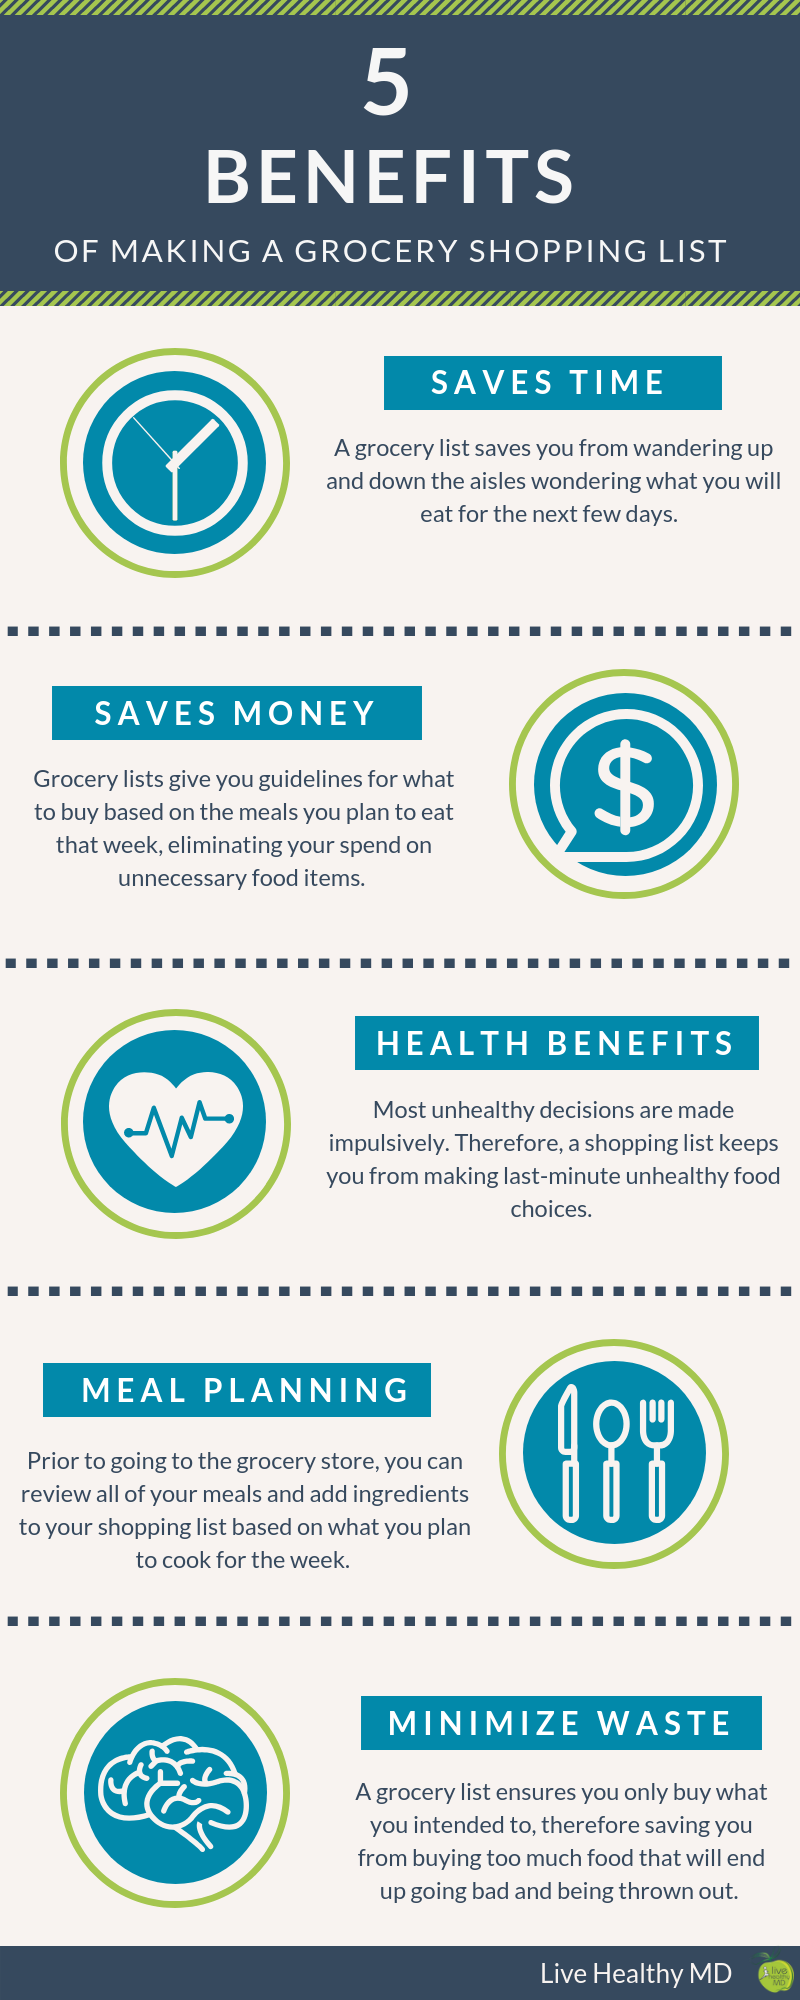 Grocery List Benefits Infographic